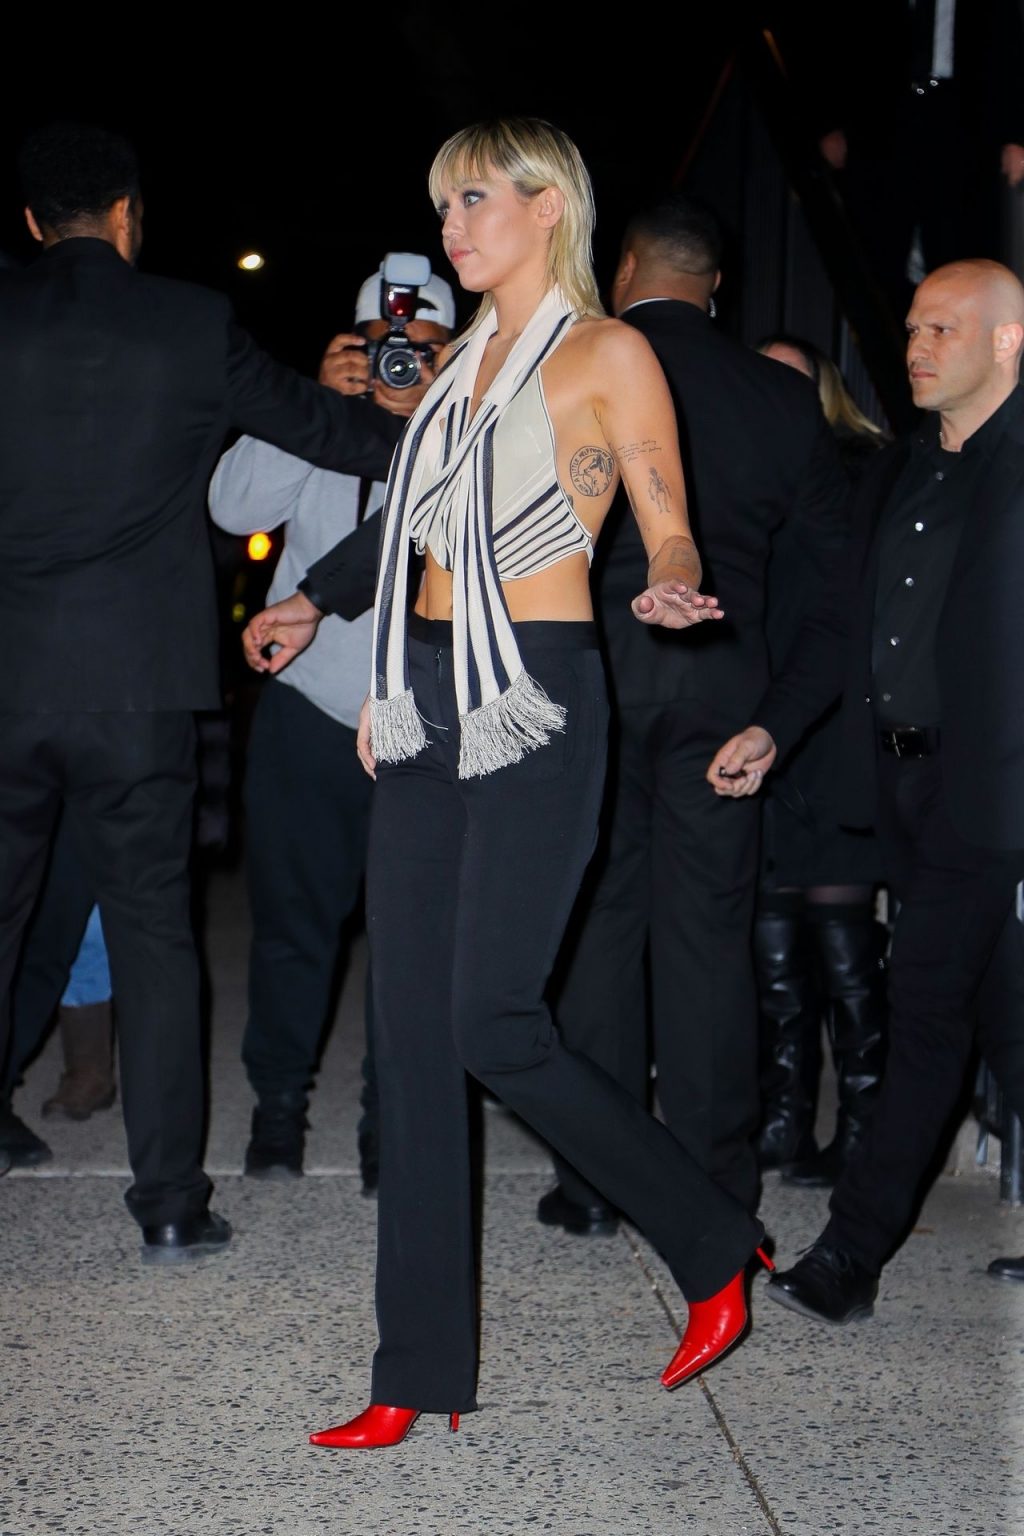 Miley Cyrus Has a Nip Slip in a Silk Top Arriving at The Bowery Hotel (61 Photos)